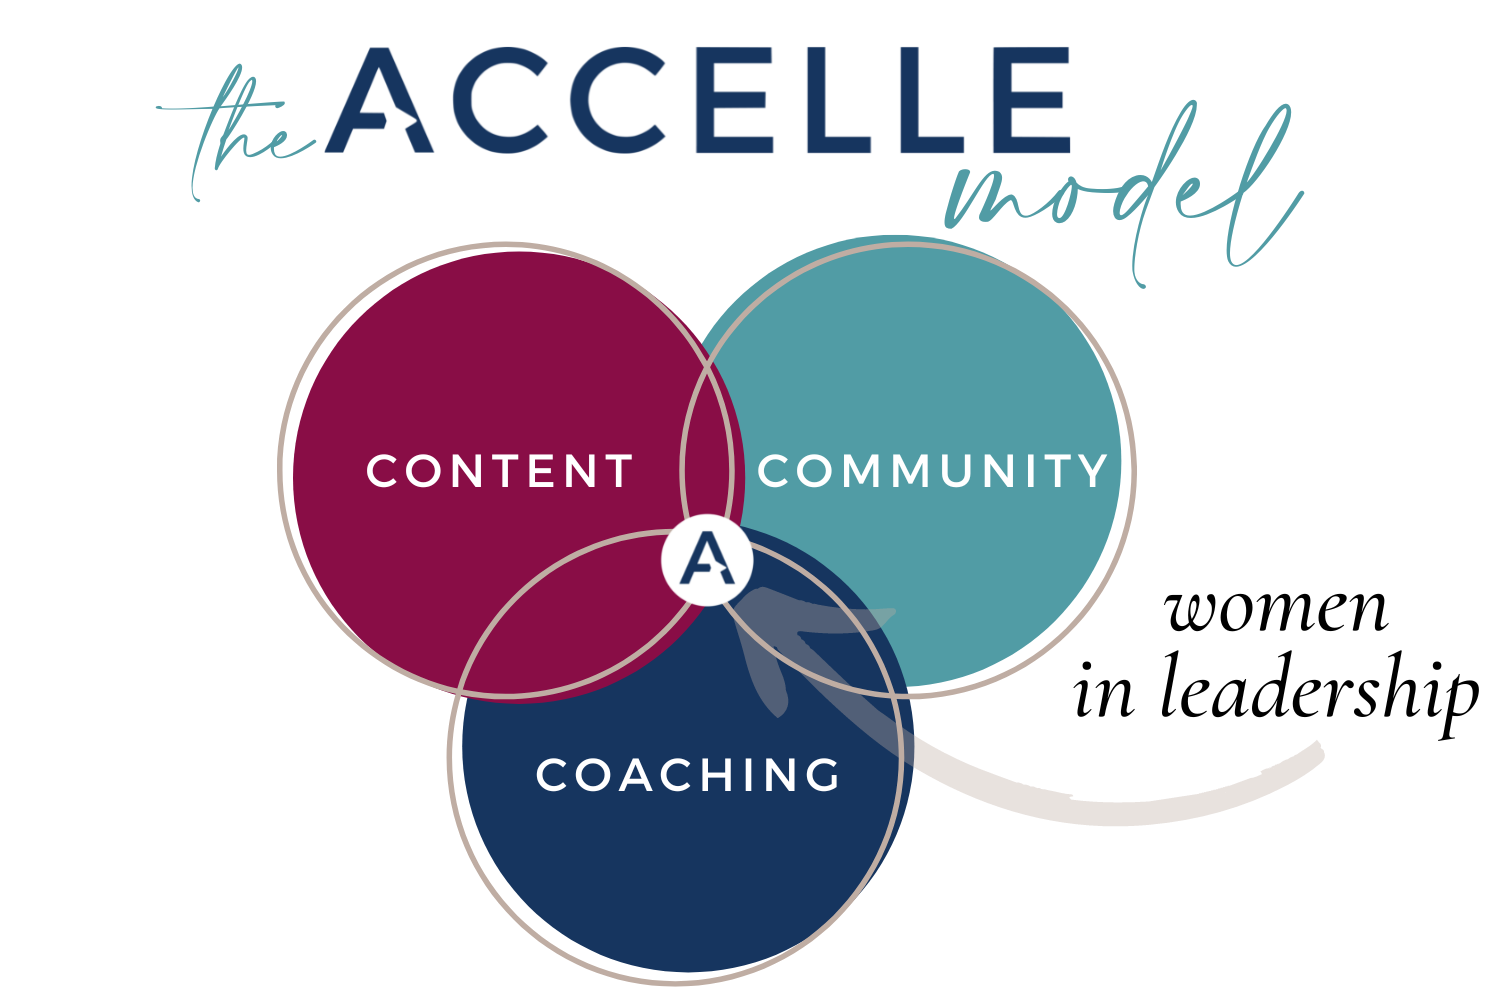 The Accelle 3C Model